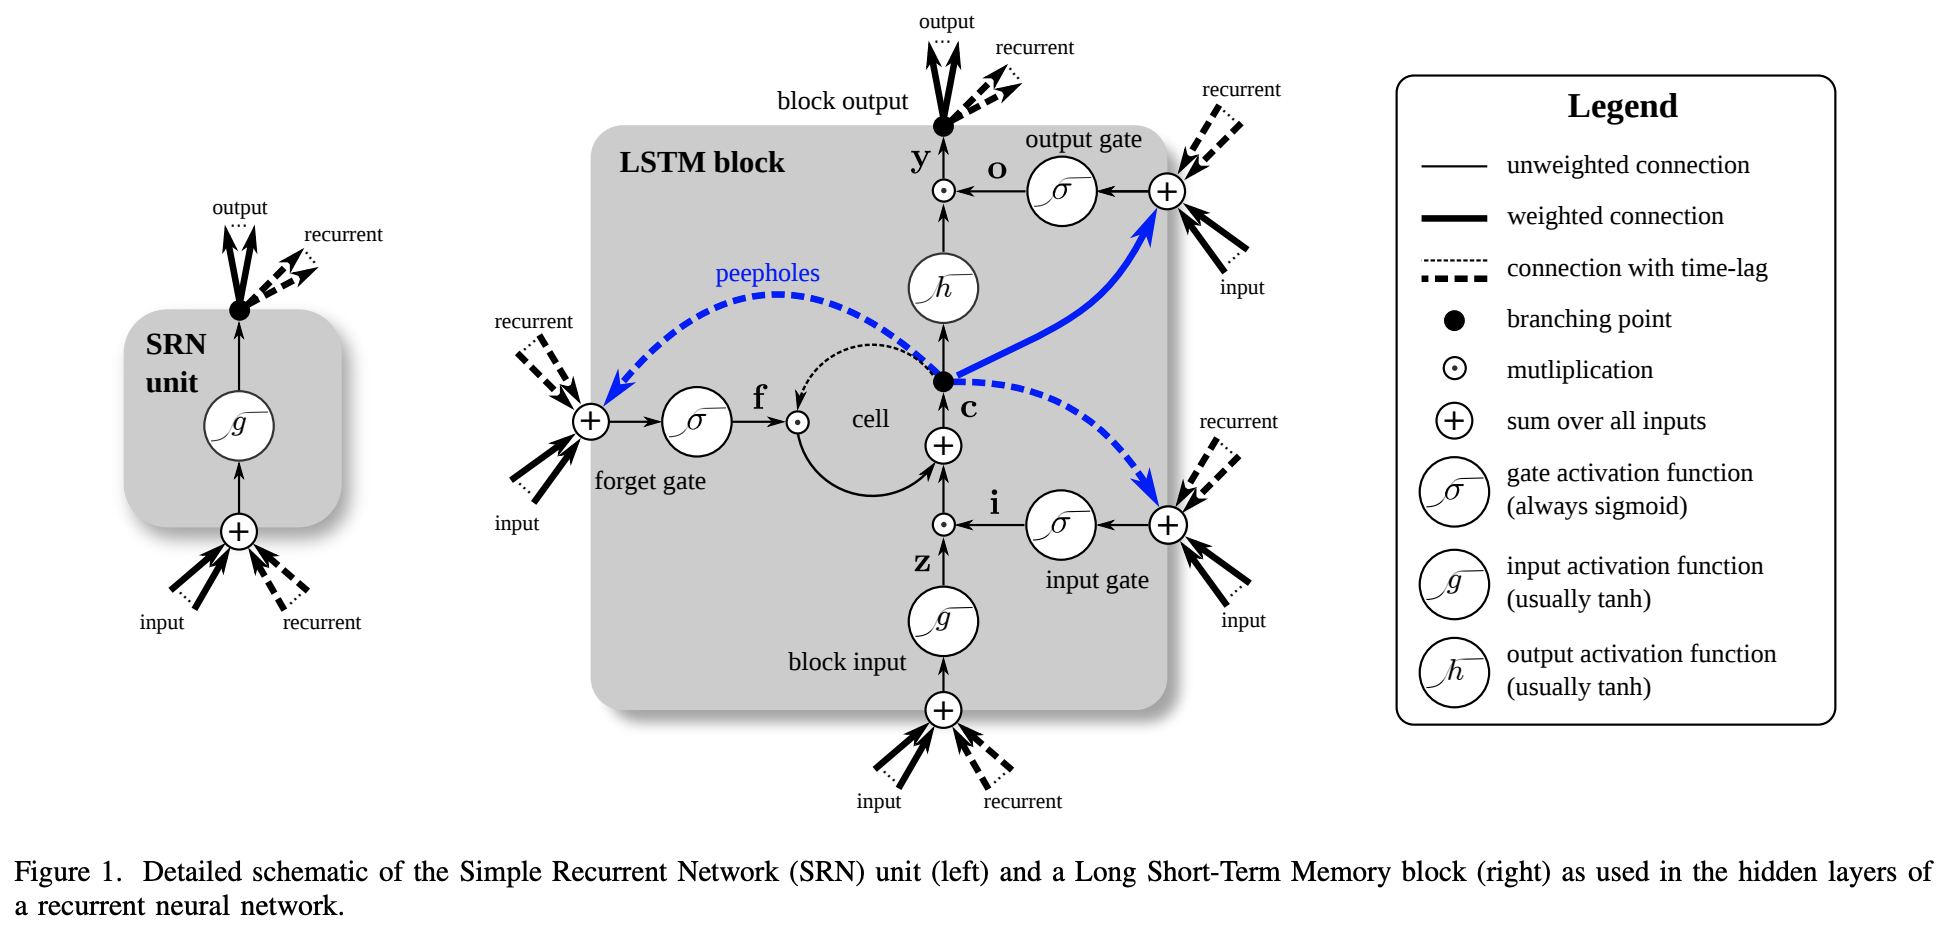 RNN and LSTM compared